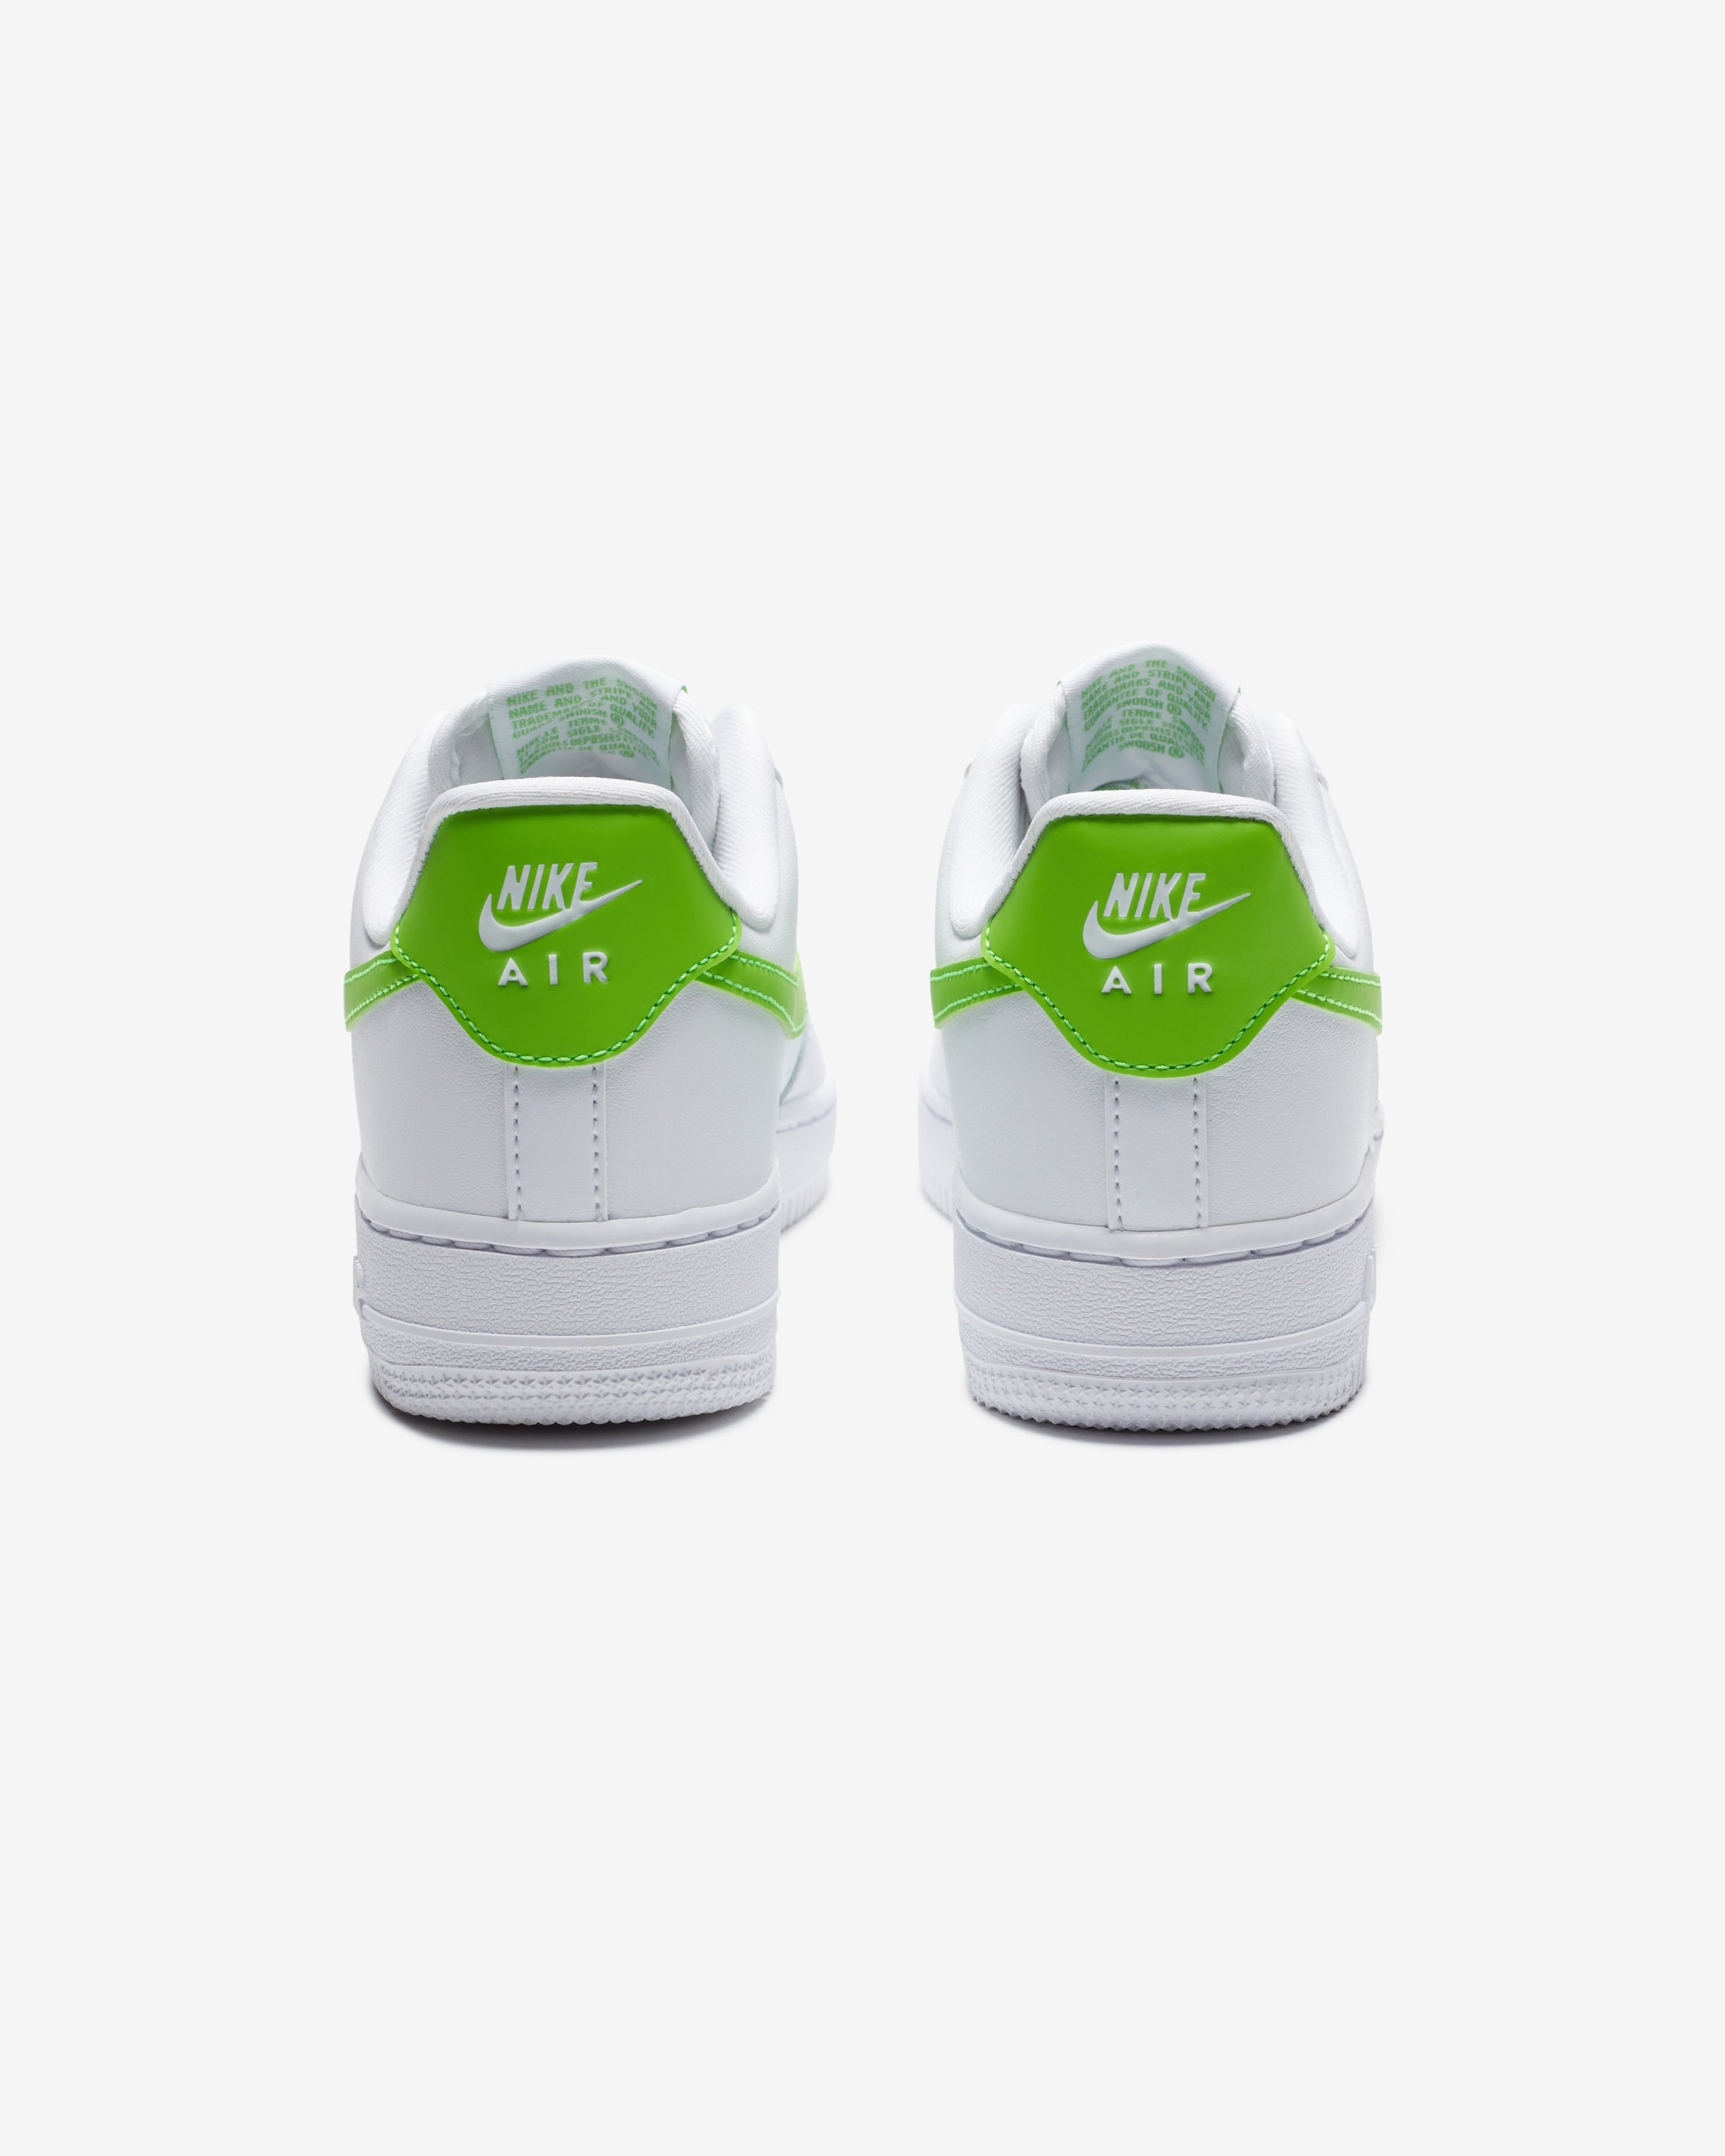 NIKE WOMEN'S AIR FORCE 1 '07 - WHITE/ ACTIONGREEN